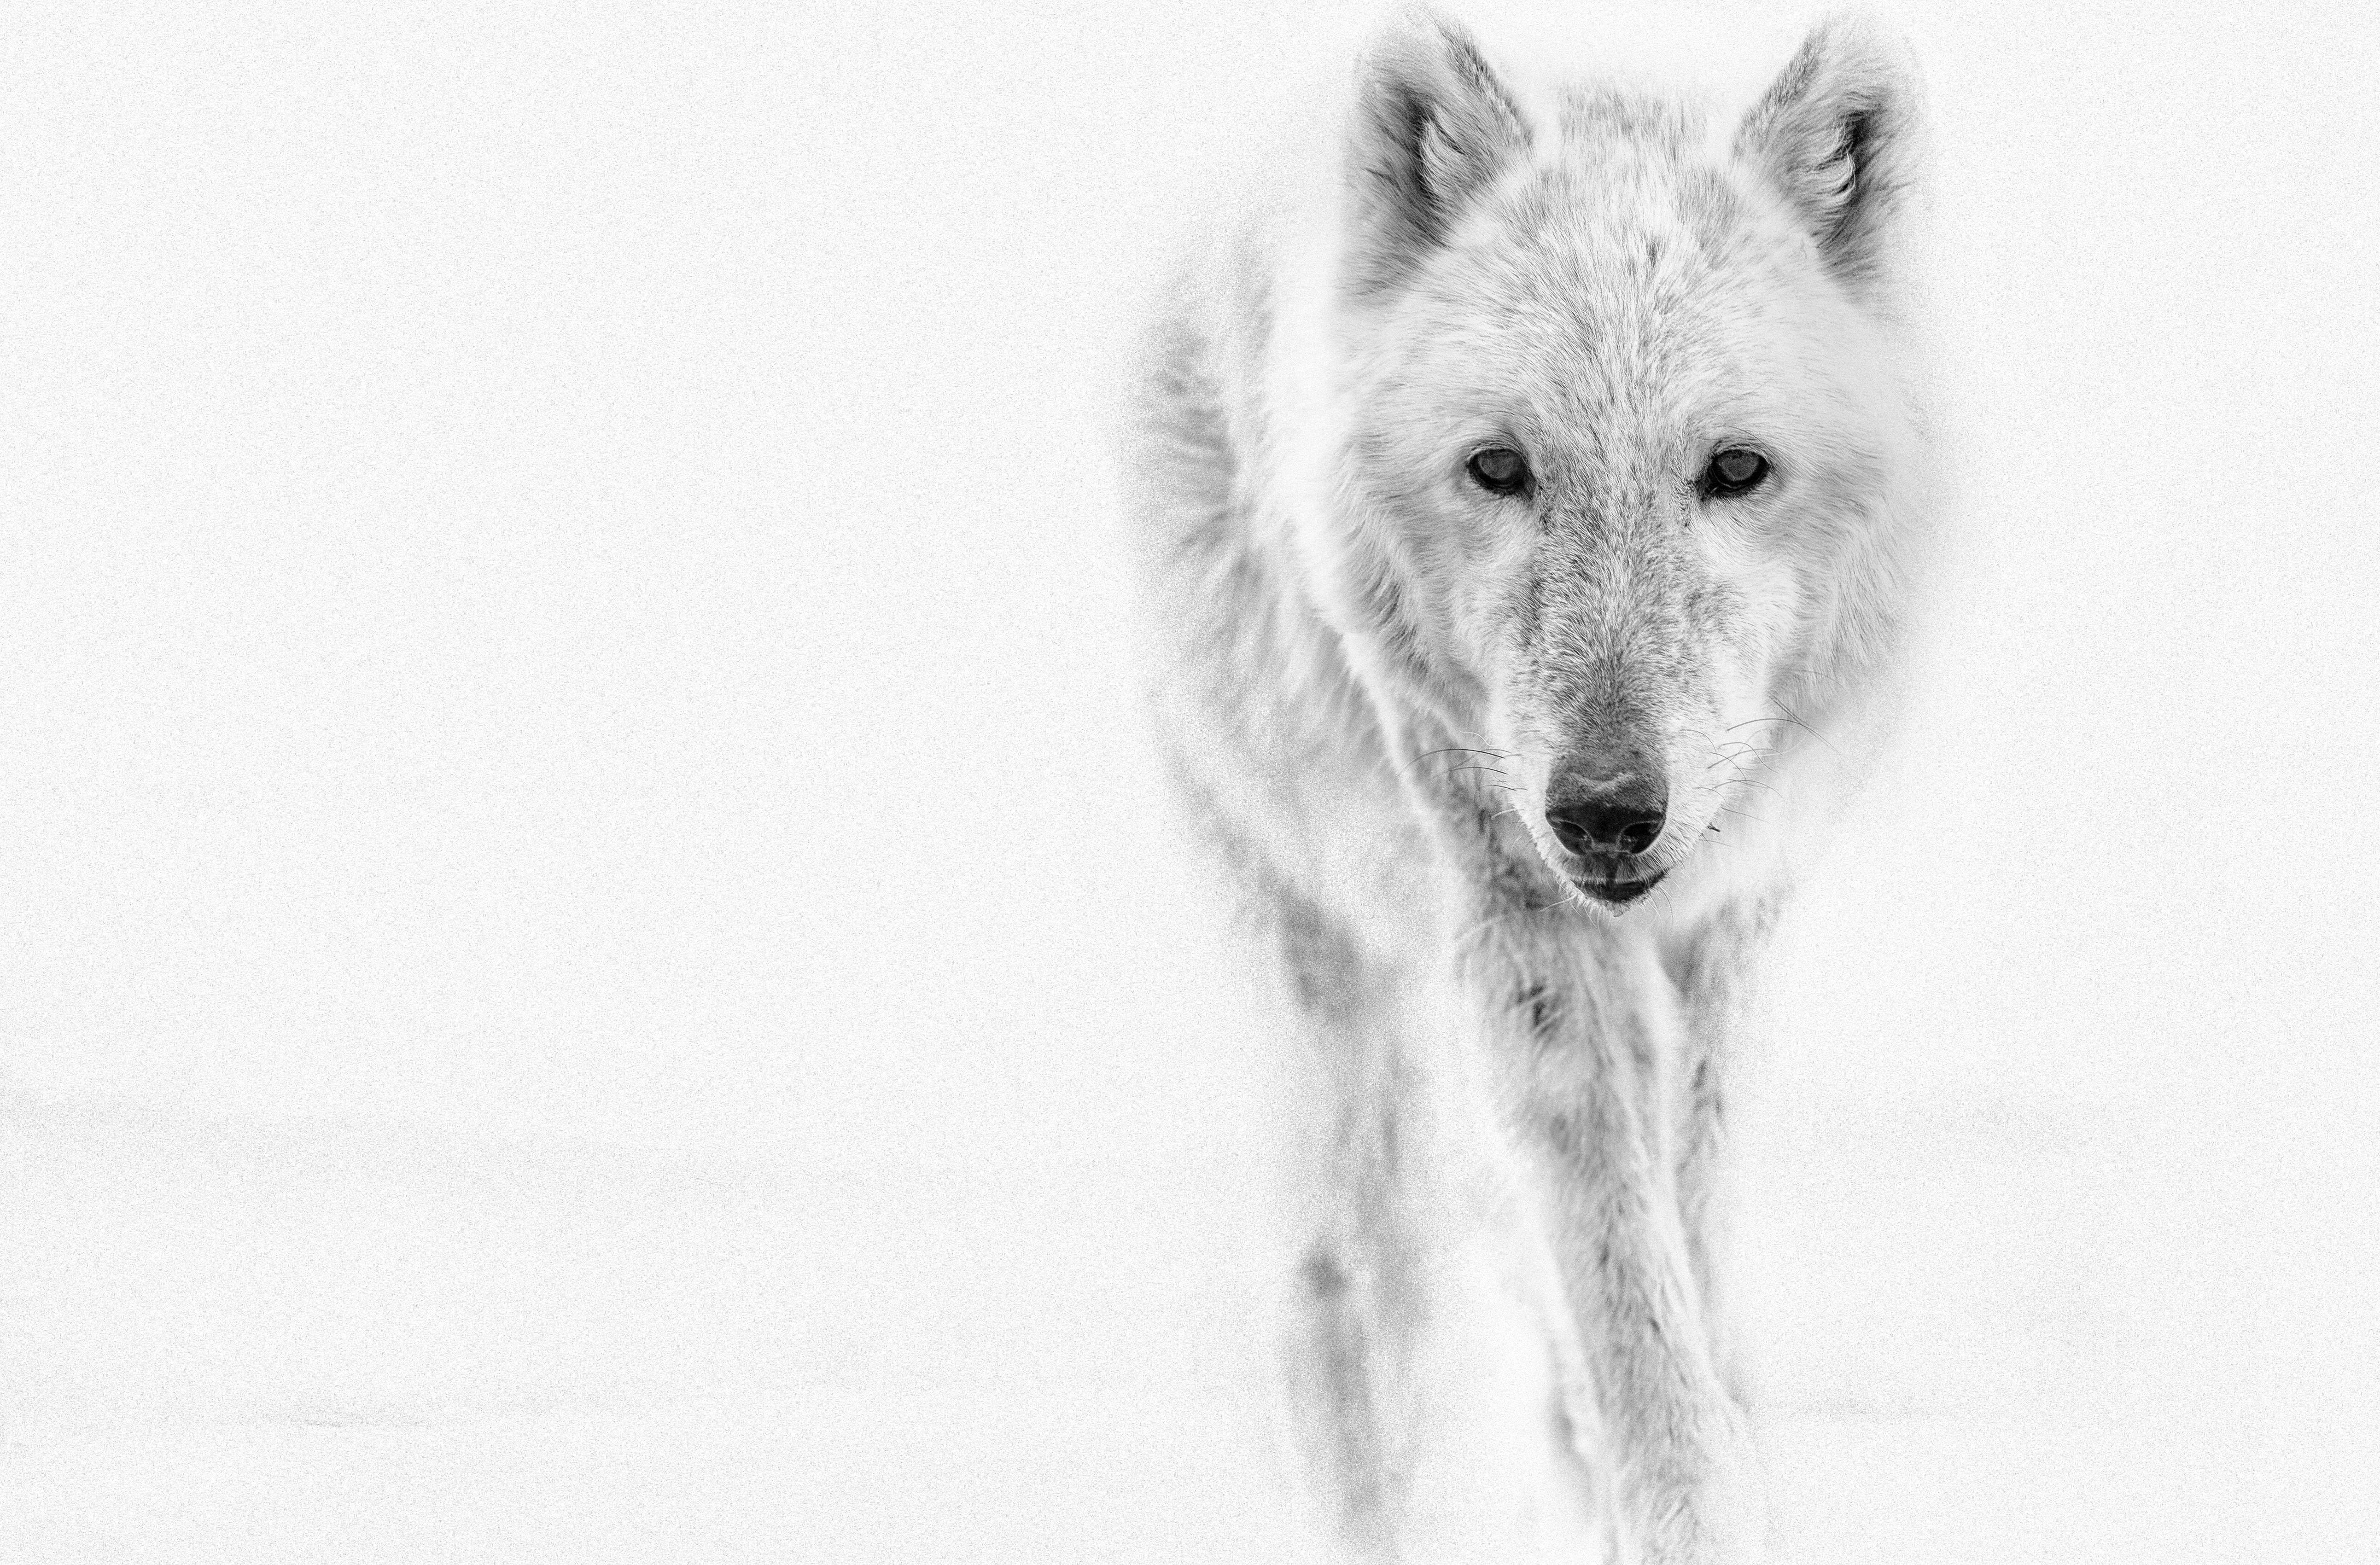 Shane Russeck Animal Print - Arctic Wolf 36x48 Photograph Black and White Photography, Wolves Art Print